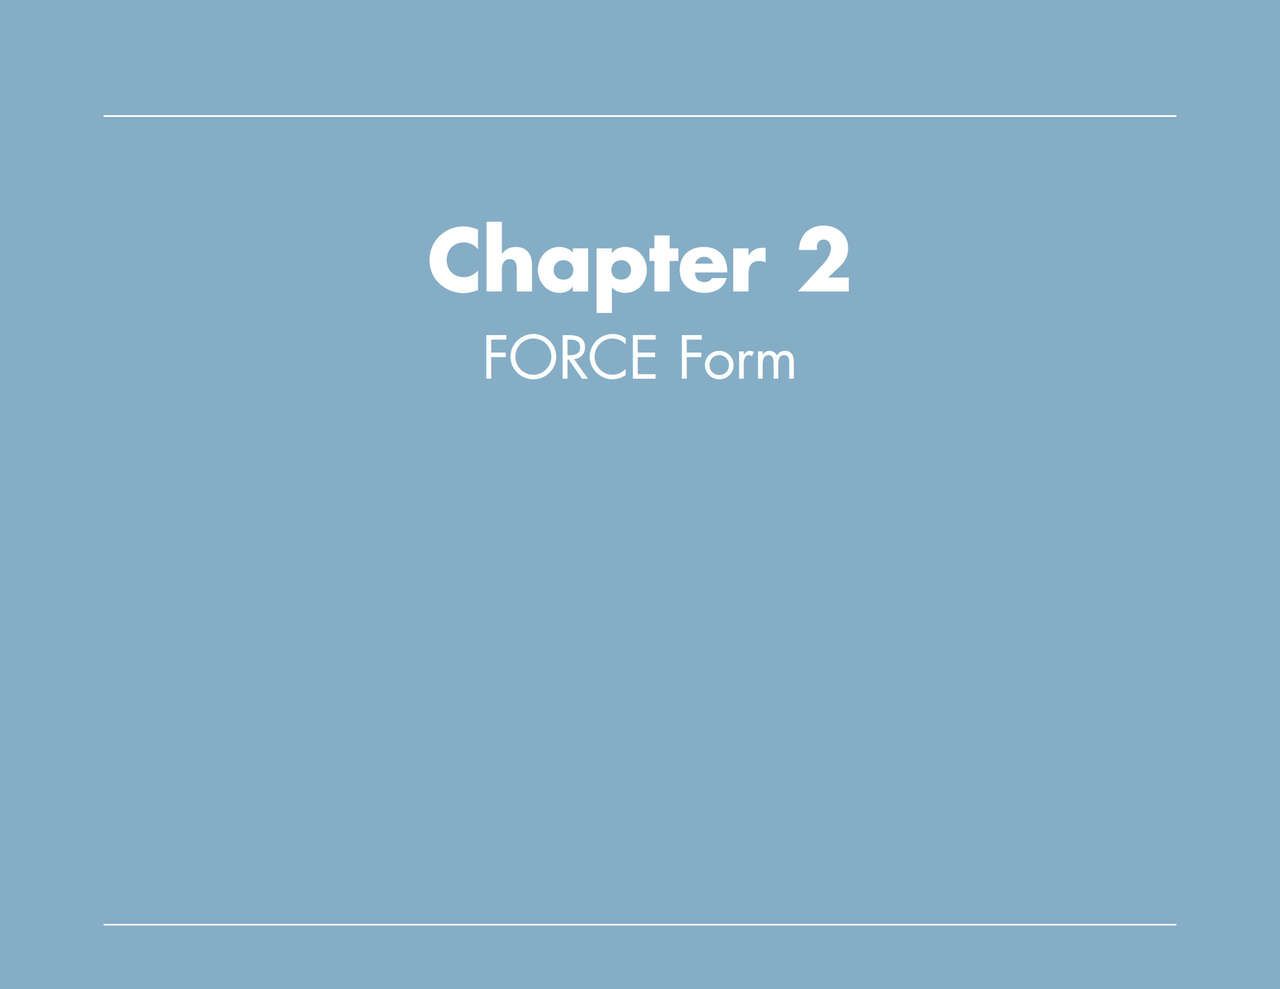 The Force companion_ quick tips and tricks-CRC Press (2019) - Michael D. Mattesi [Digital] 102